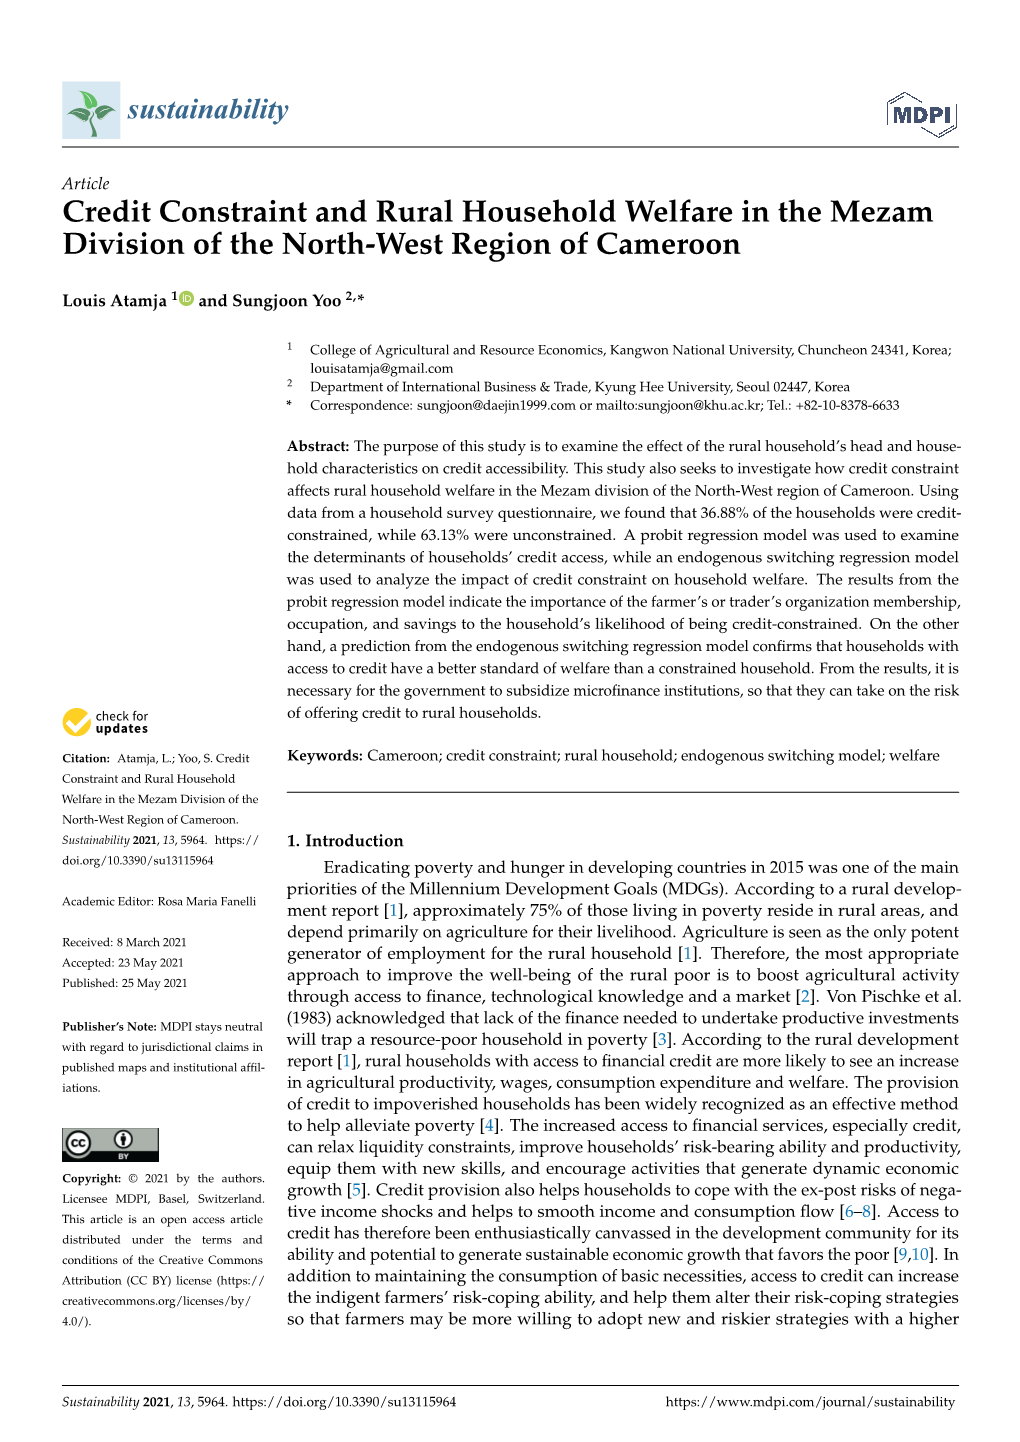 Credit Constraint and Rural Household Welfare in the Mezam Division of the North-West Region of Cameroon